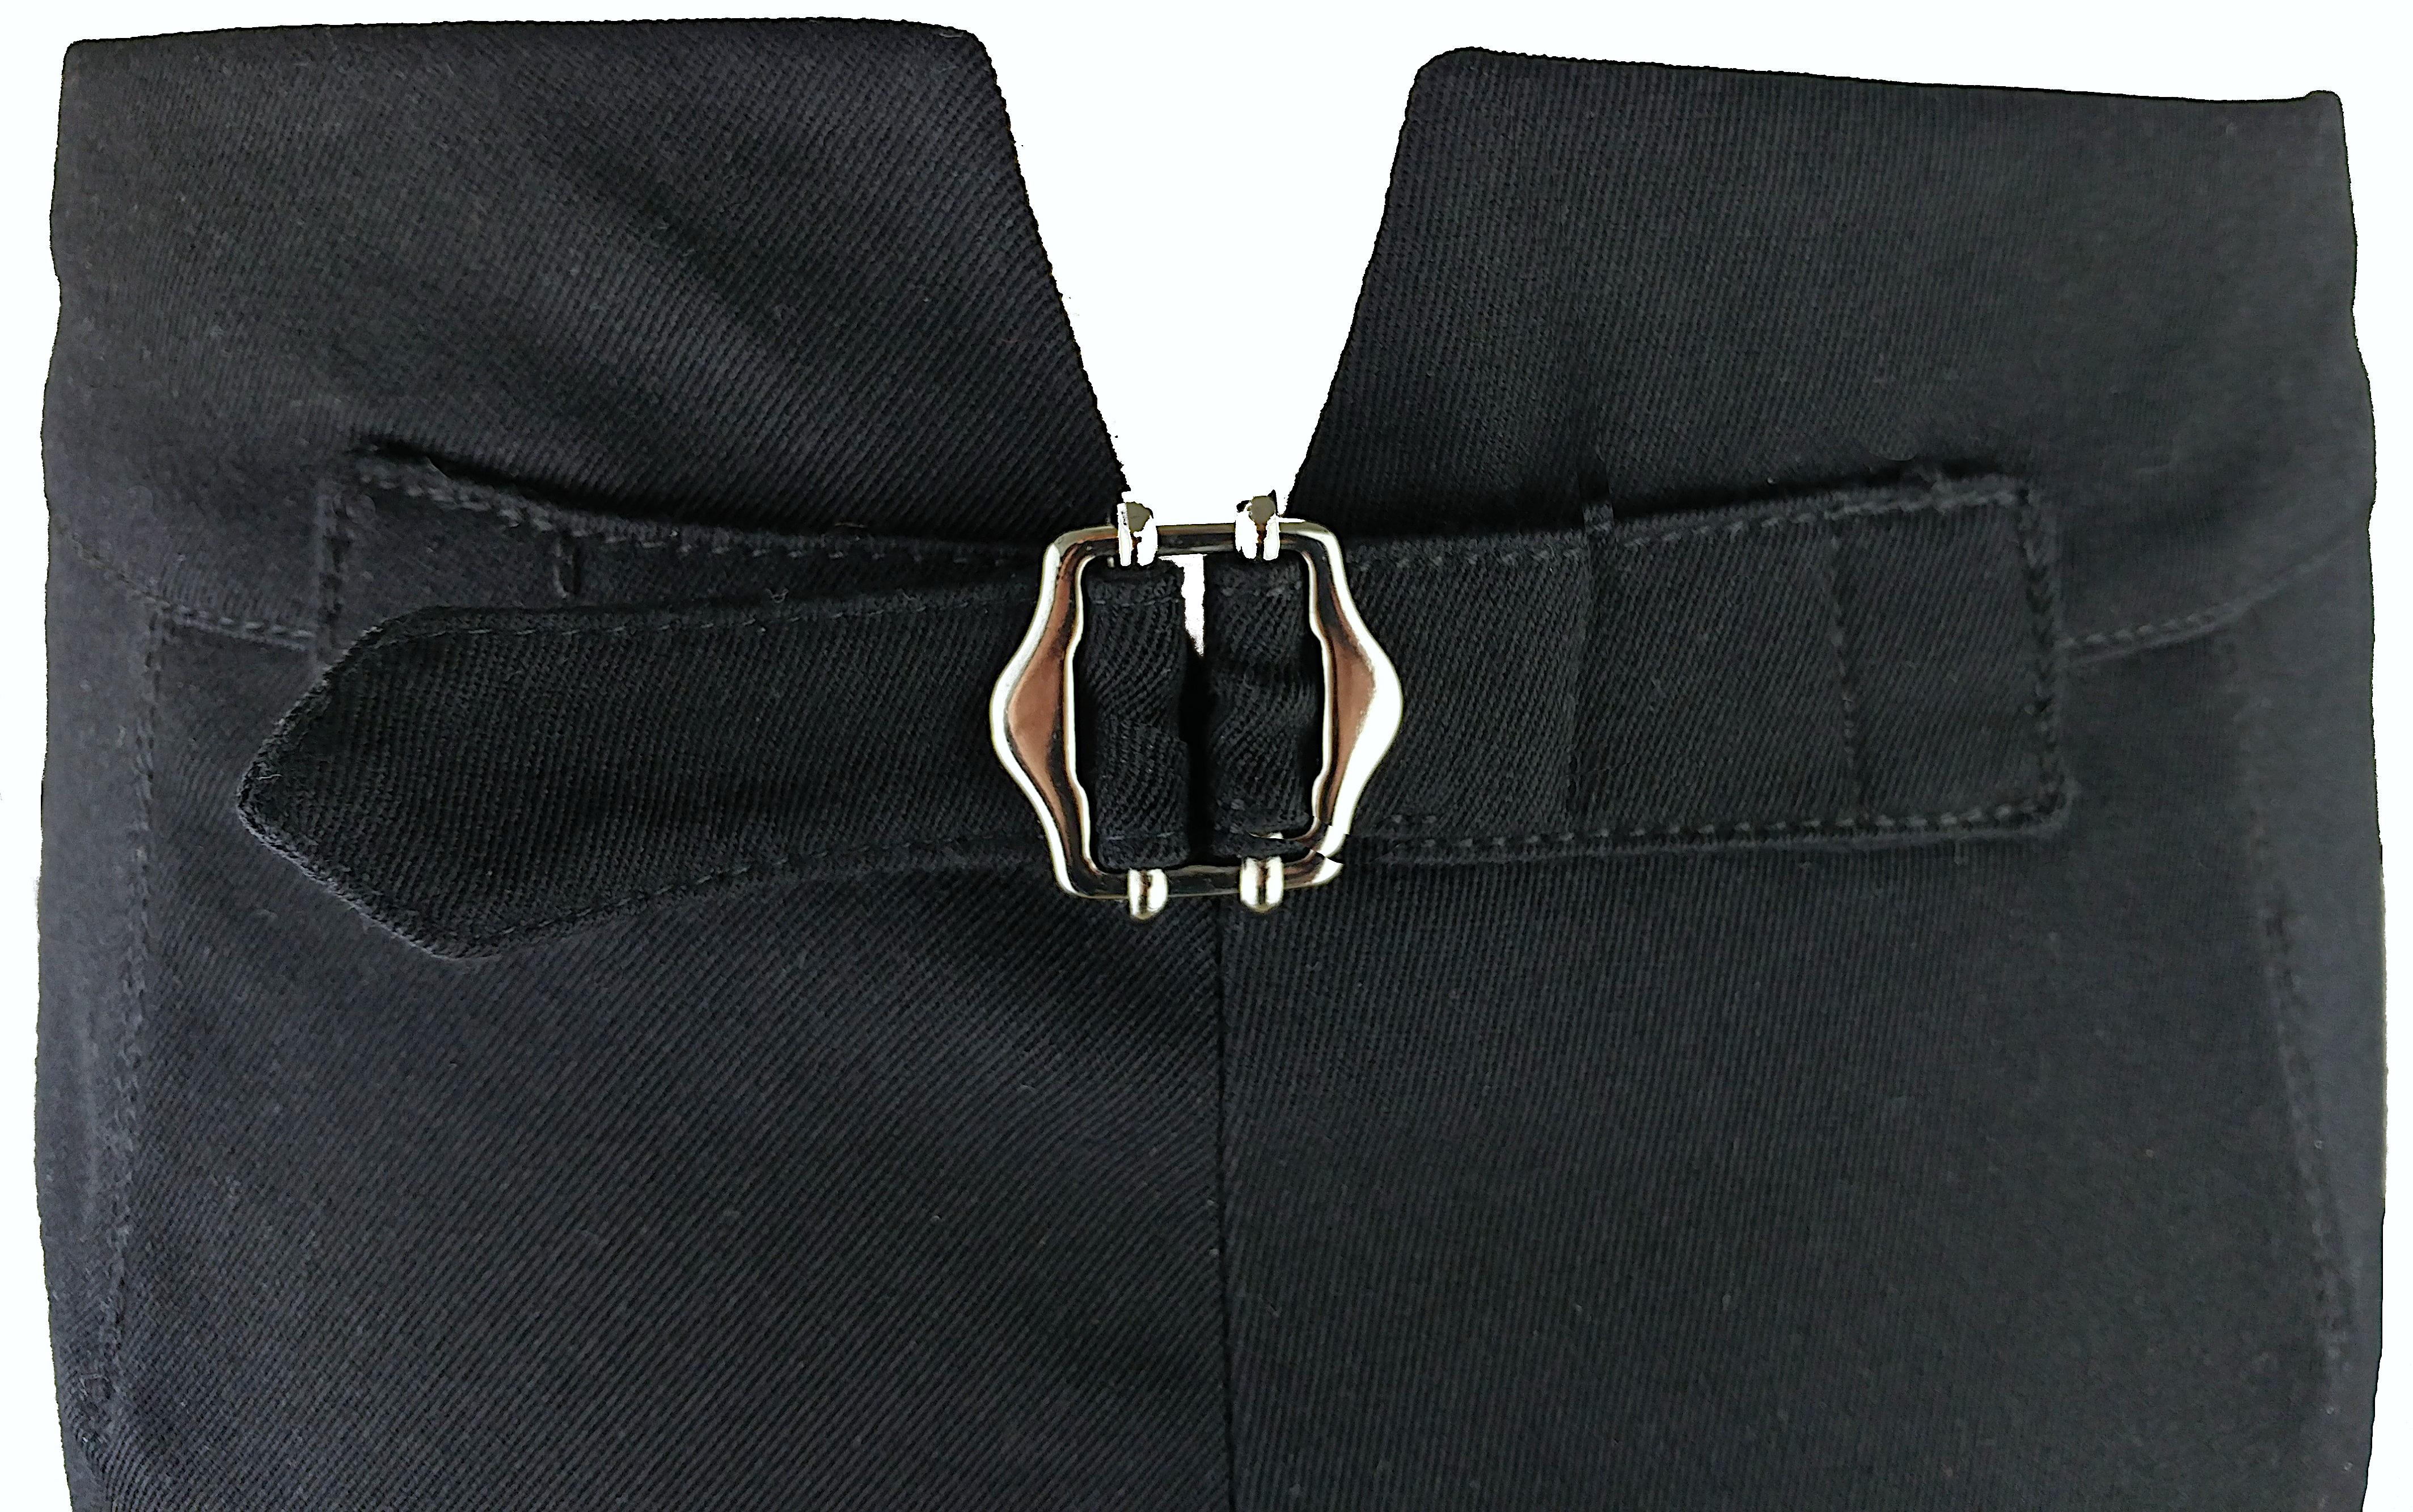 PRADA – Authentic Dark Blue Riding Pants w/ Leather Applications  Size 8US 40EU In Excellent Condition For Sale In Cuggiono, MI